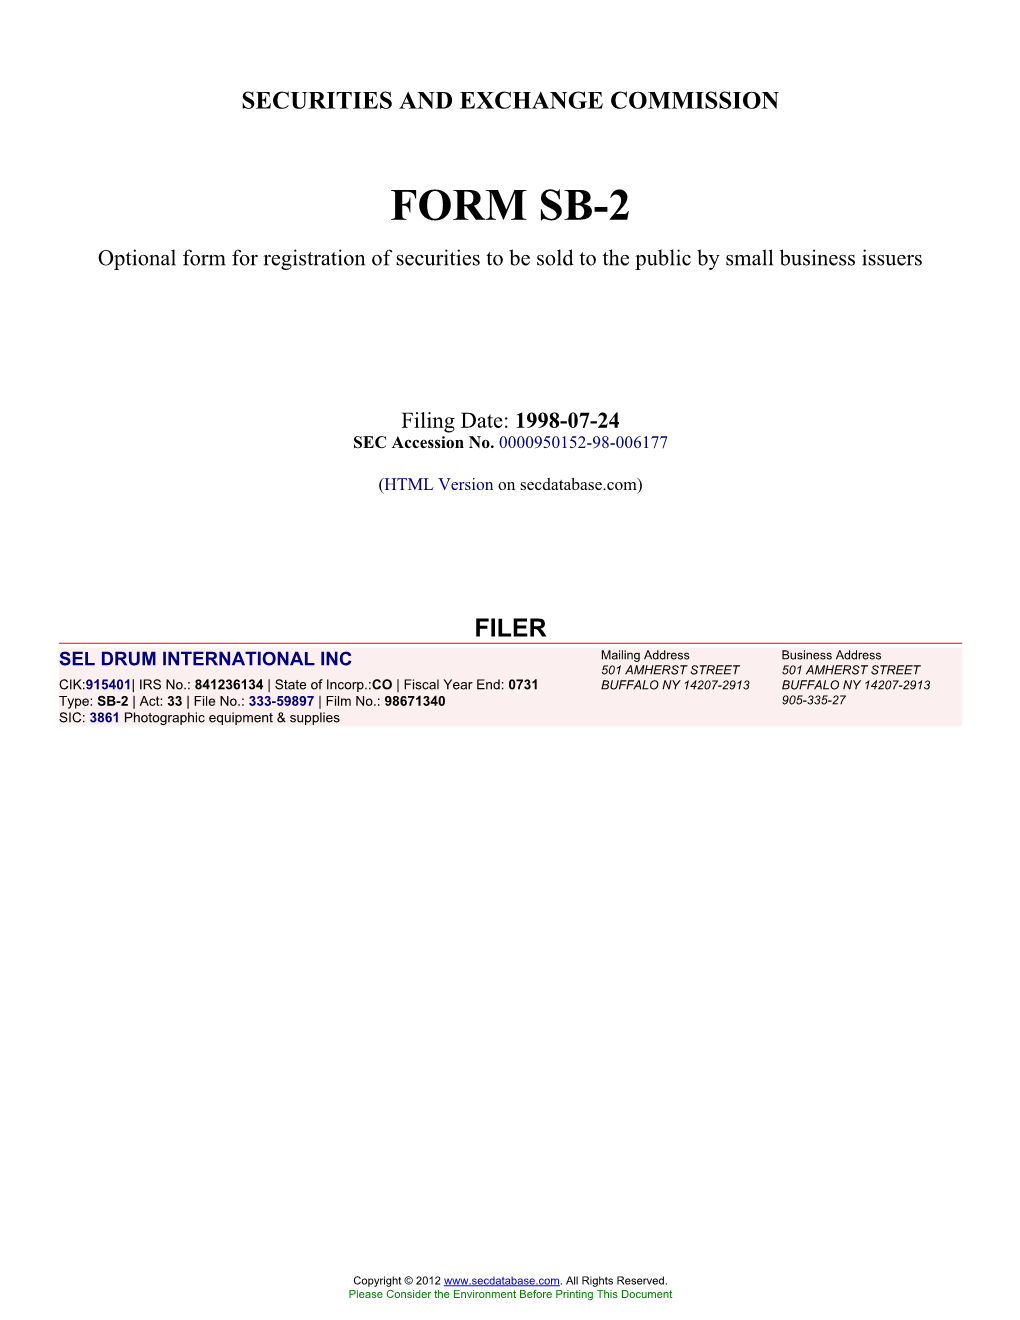 FORM SB-2 Optional Form for Registration of Securities to Be Sold to the Public by Small Business Issuers